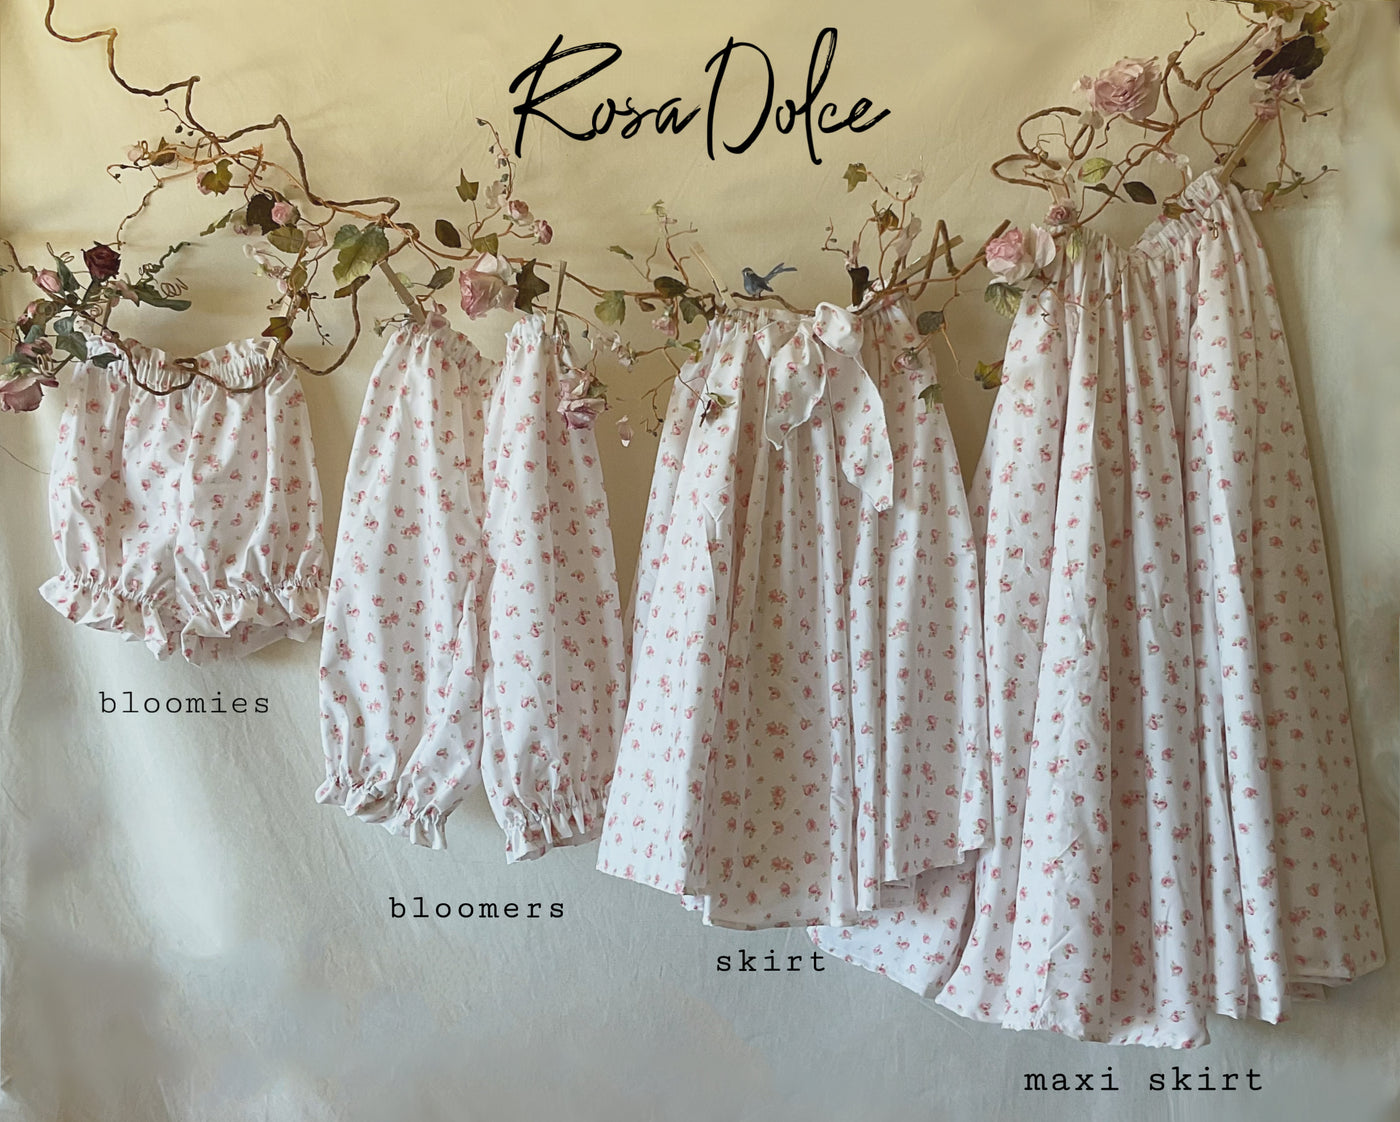 Rosa Dolce Skirts